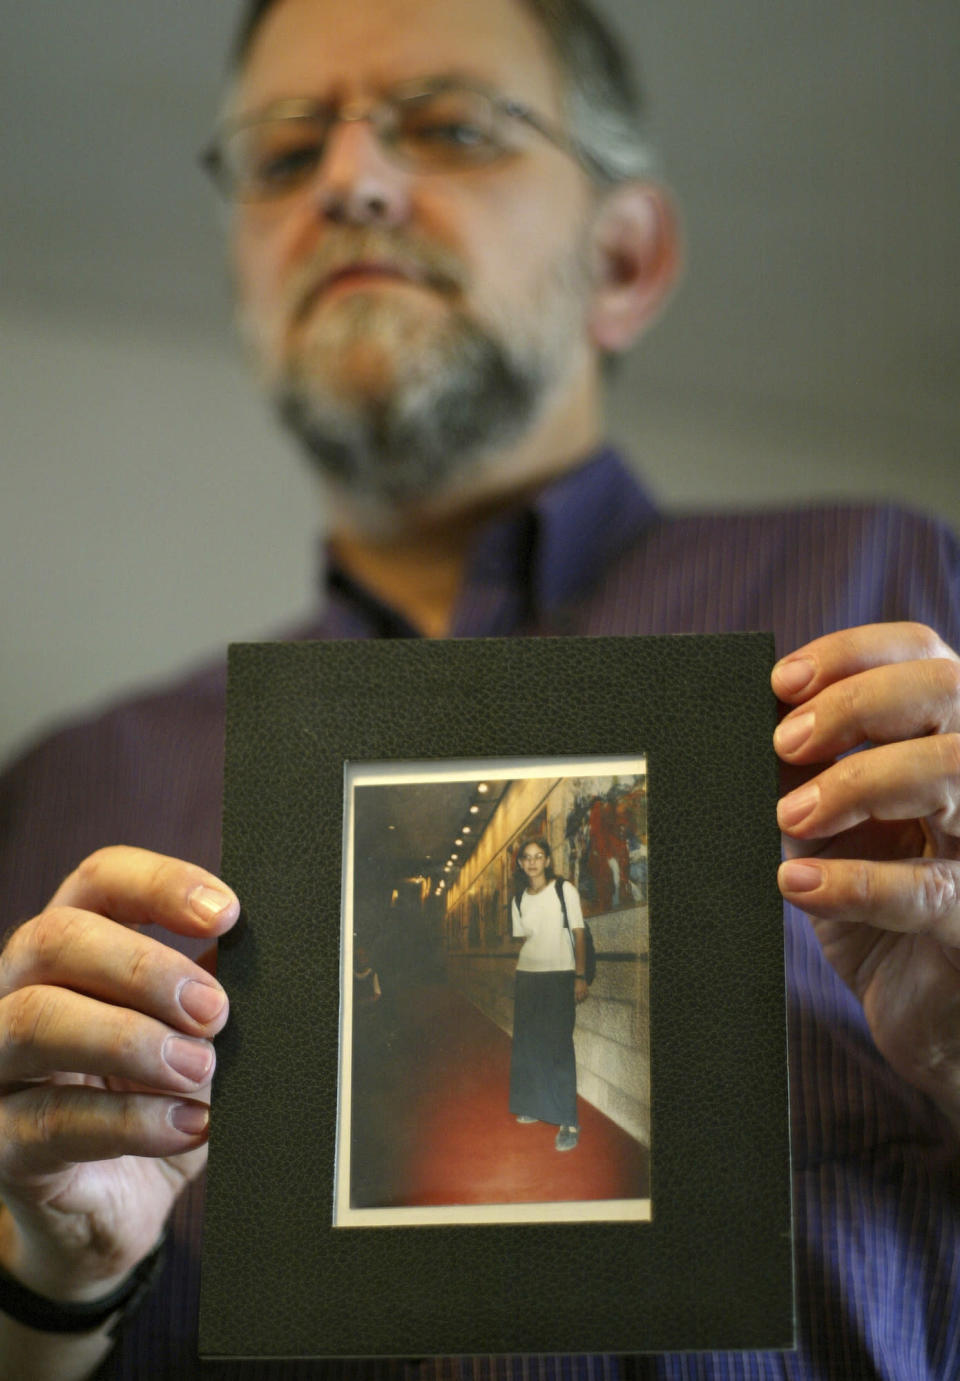 FILE - Arnold Roth holds a photo of his 15-year-old daughter Malki, who was killed in an August 2001 Palestinian suicide bombing at a Jerusalem pizzeria, at his house in Jerusalem, on Sept. 28, 2004. The family of an Israel-American girl killed in a 2001 Palestinian suicide bombing in Jerusalem is seeking a meeting with President Joe Biden in hopes of forcing Jordan to extradite Tamimi, who was convicted in the deadly attack. The parents of Malki Roth sent a letter to the White House on Sunday, July 10, 2022 asking to meet with Biden when he comes to Jerusalem this week. They want the president to put pressure on Jordan, a close American ally, to send Tamimi to the U.S. for trial. (AP Photo/Oded Balilty)